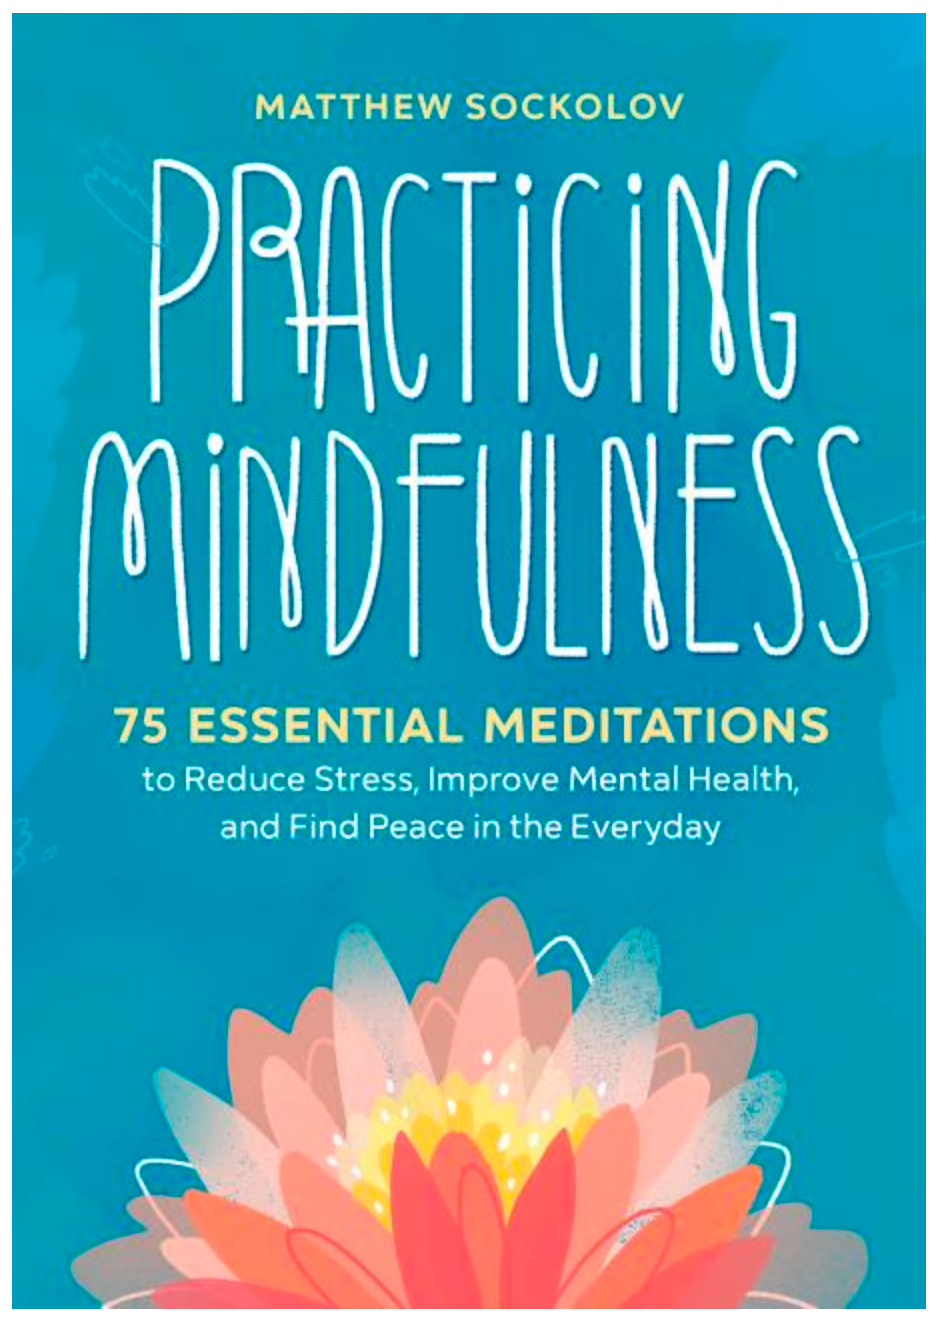 Practicing Mindfulness: 75 Essential Meditations to Reduce Stress, Improve Mental Health, and Find Peace in the Everyday - Gather Goods Co - Raleigh, NC